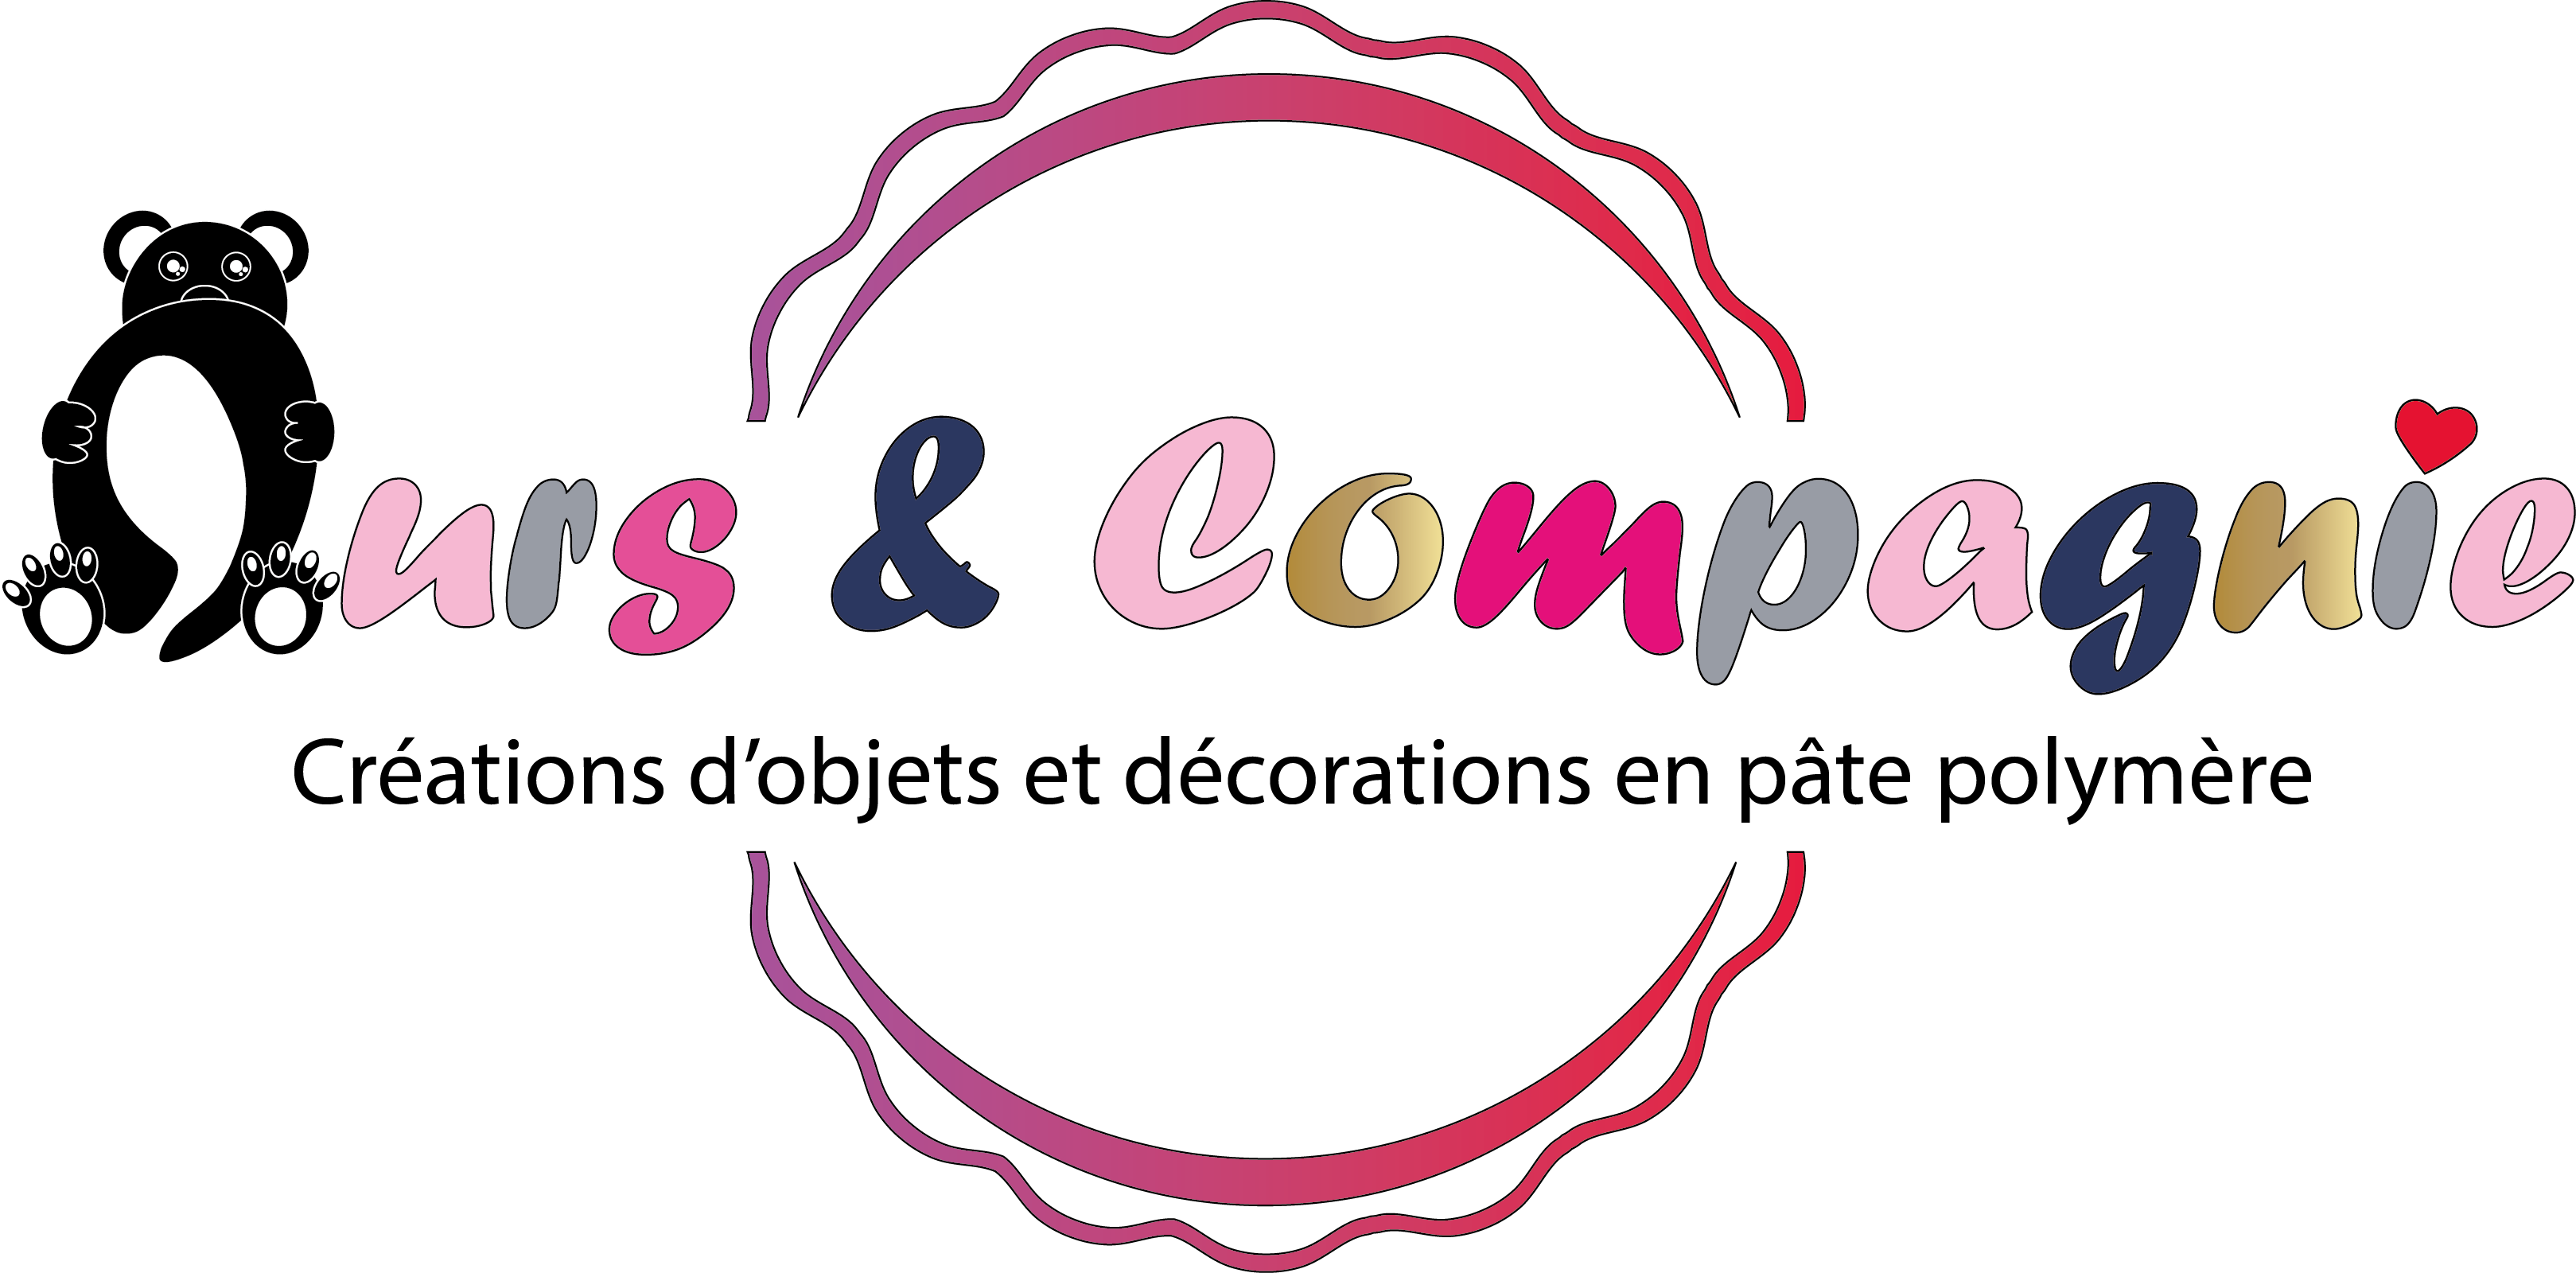 Ours & Compagnie